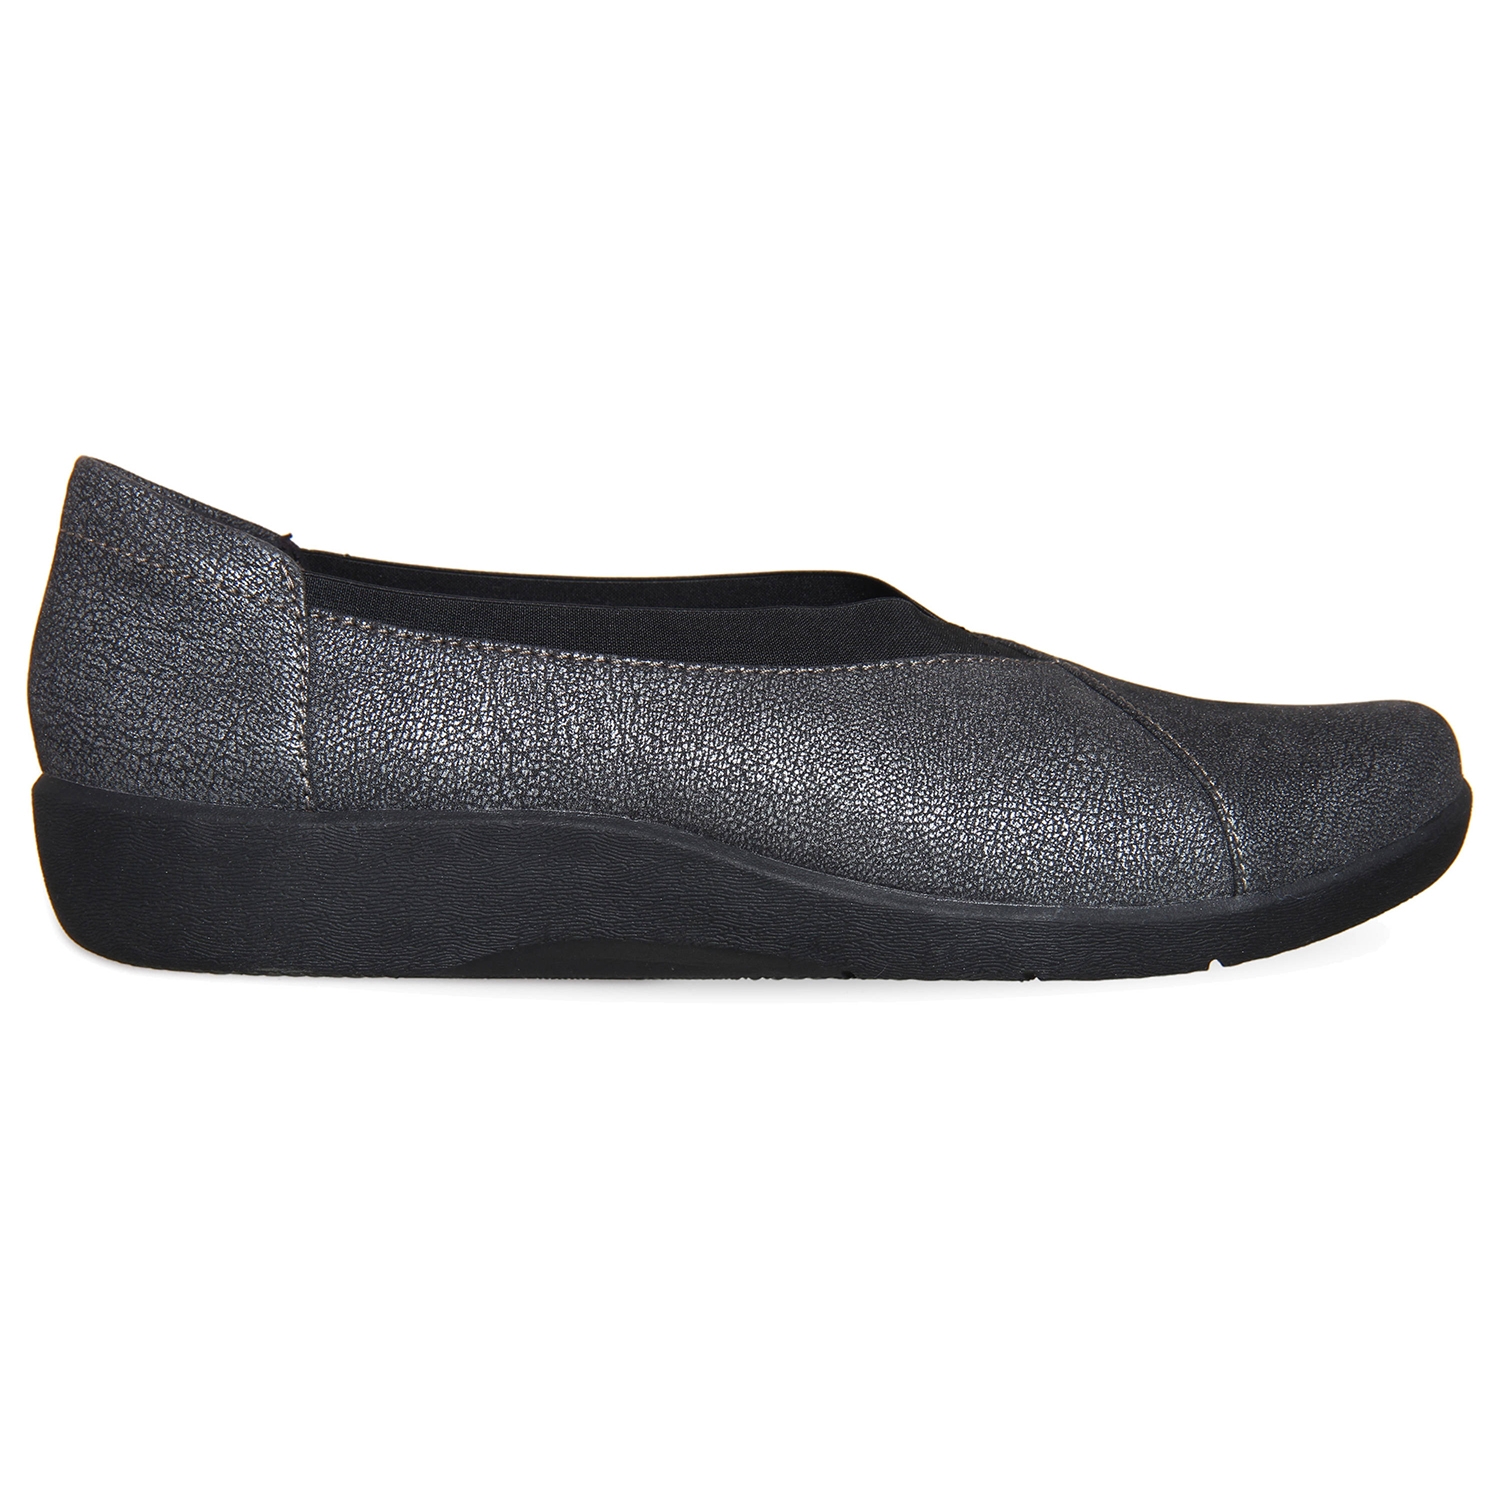 Clarks | Sillian Holly Pewter Slip On shoes